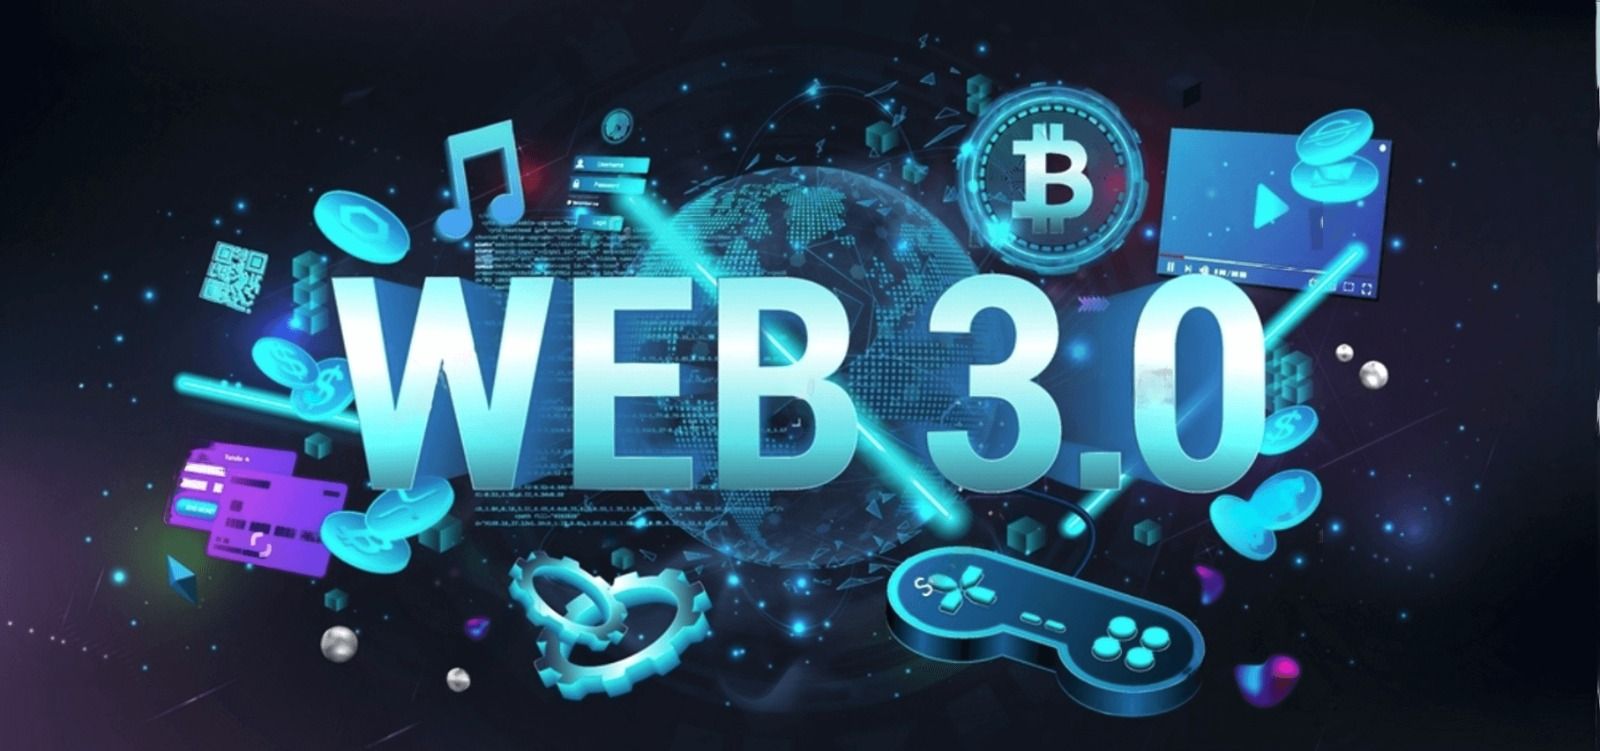 Web 3.0 is a new generation of the Internet, using blockchain and artificial intelligence - Ai, modern internet technologies IoT. Web 3.0 - blockchain system, simple code, cryptocurrency. 3D banner